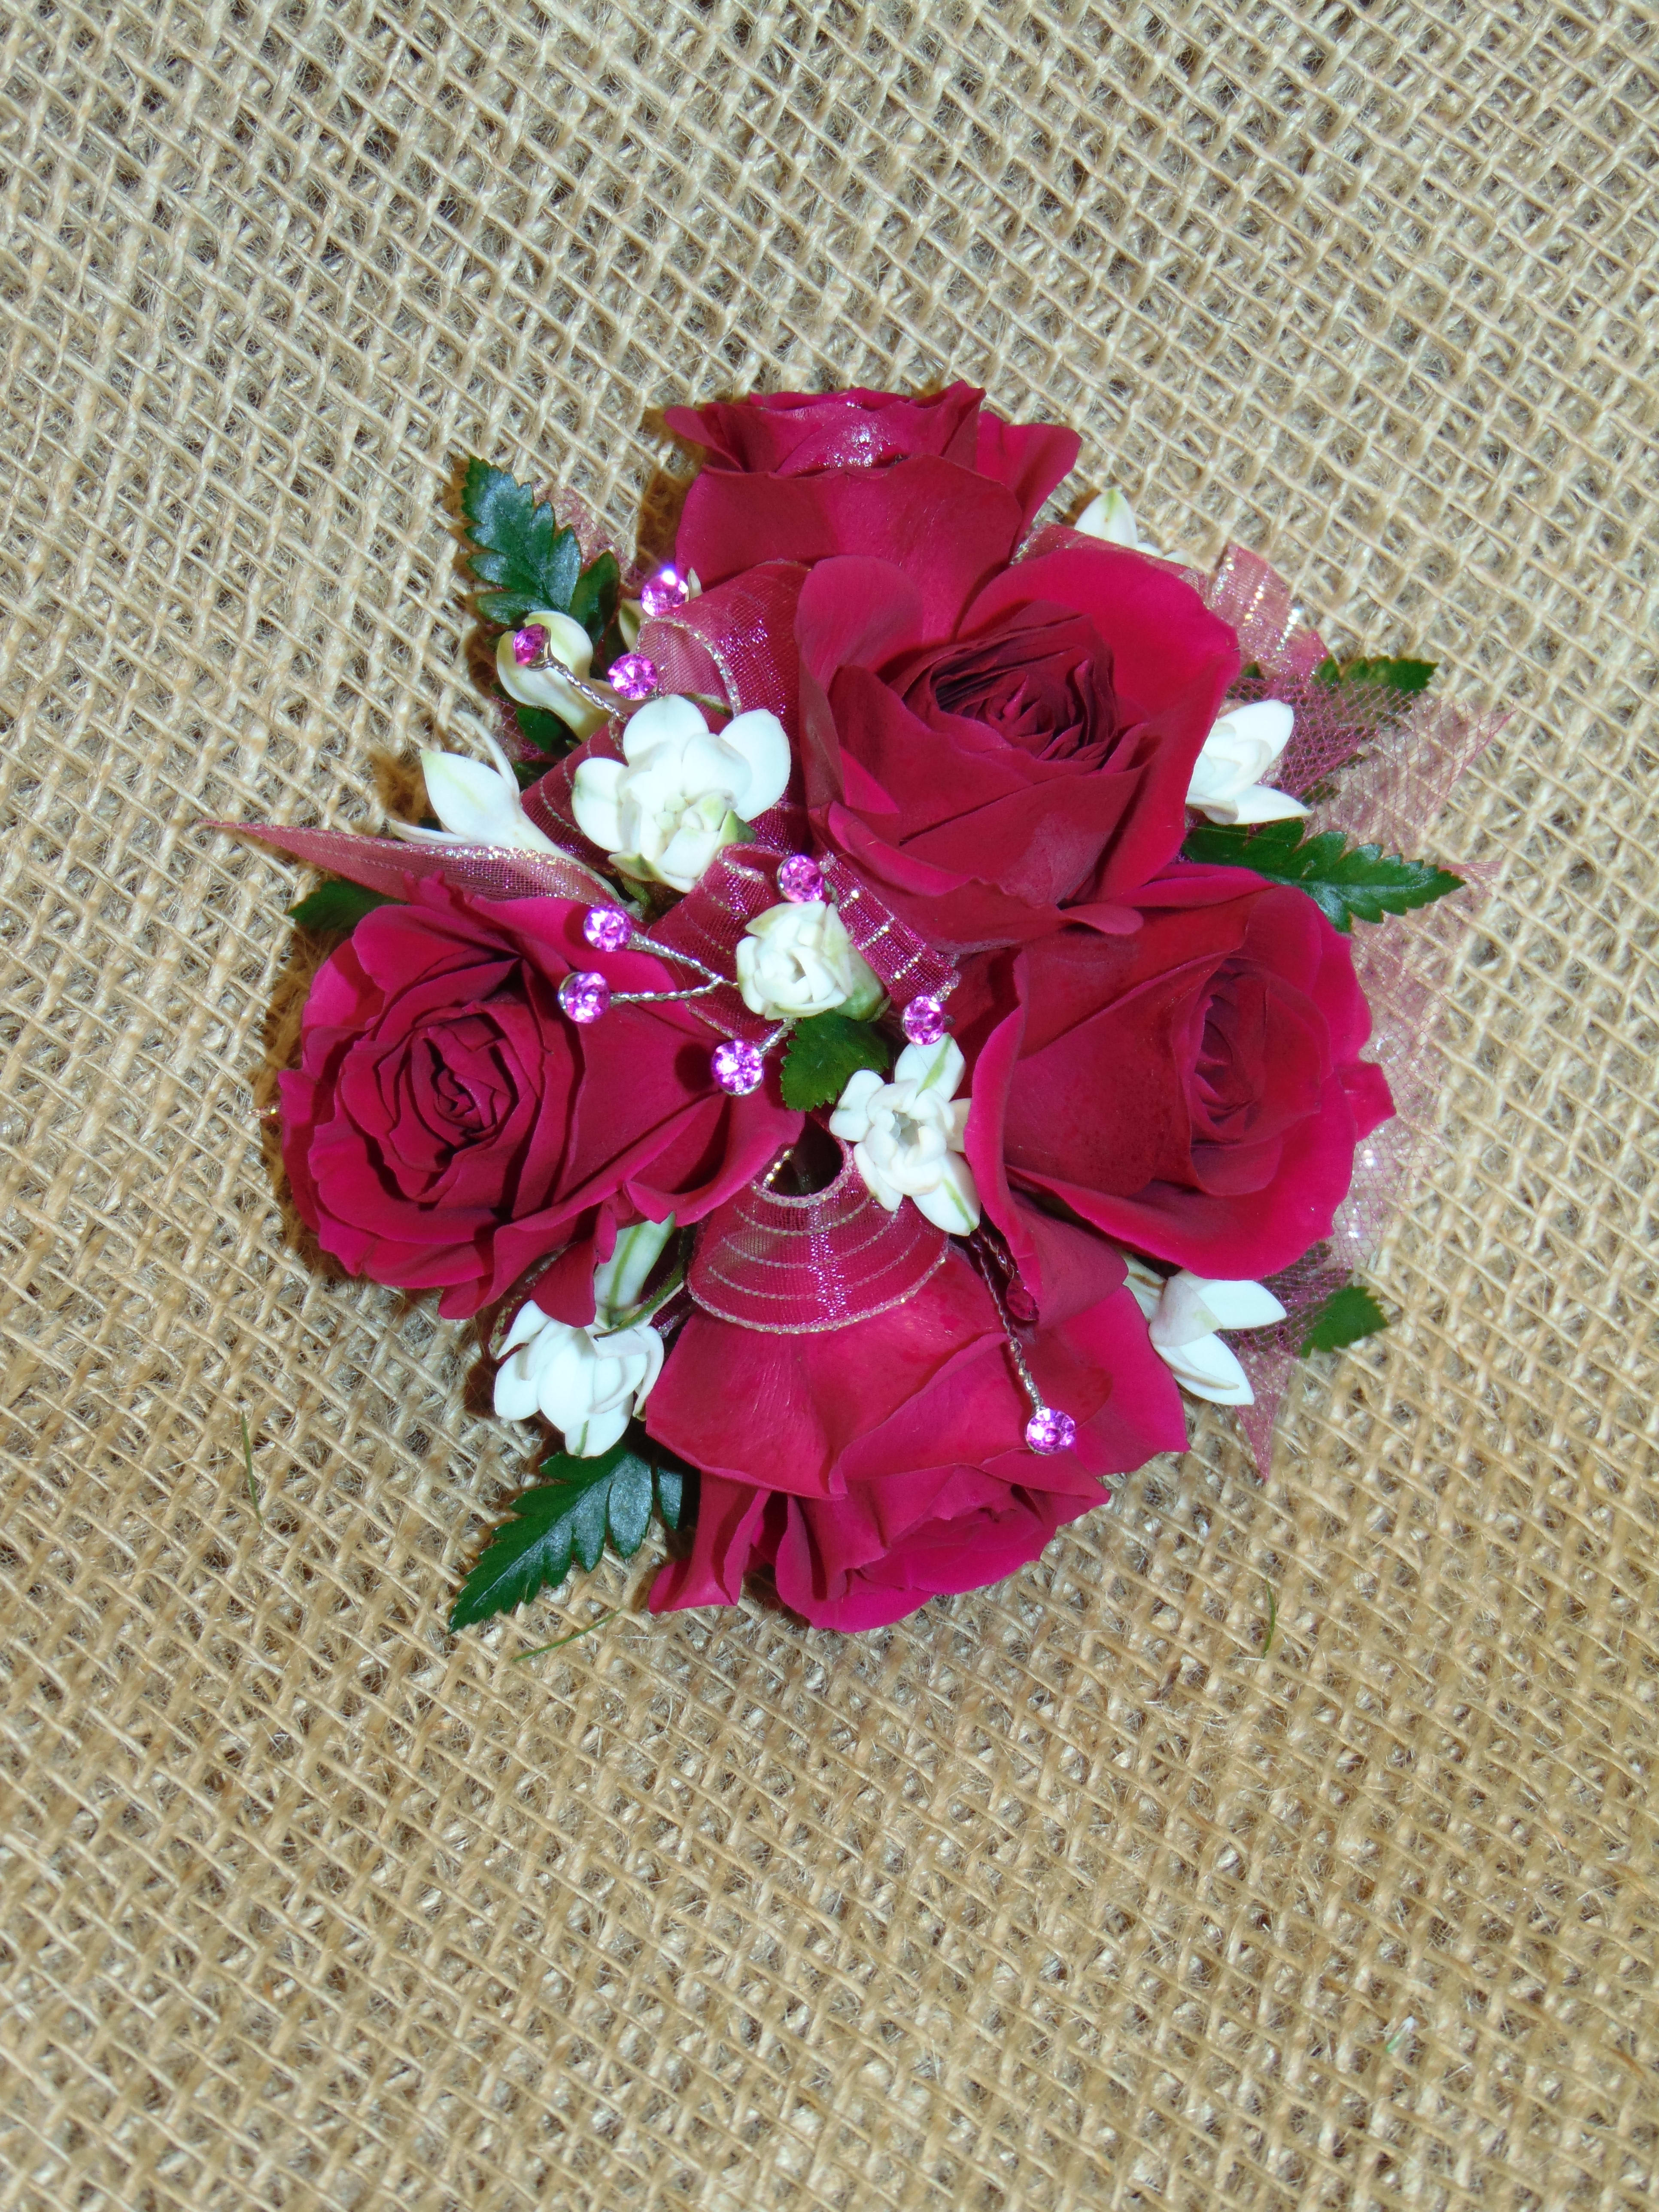 Pink and White Rose Wrist Corsage with Gold Bow in Philadelphia, PA